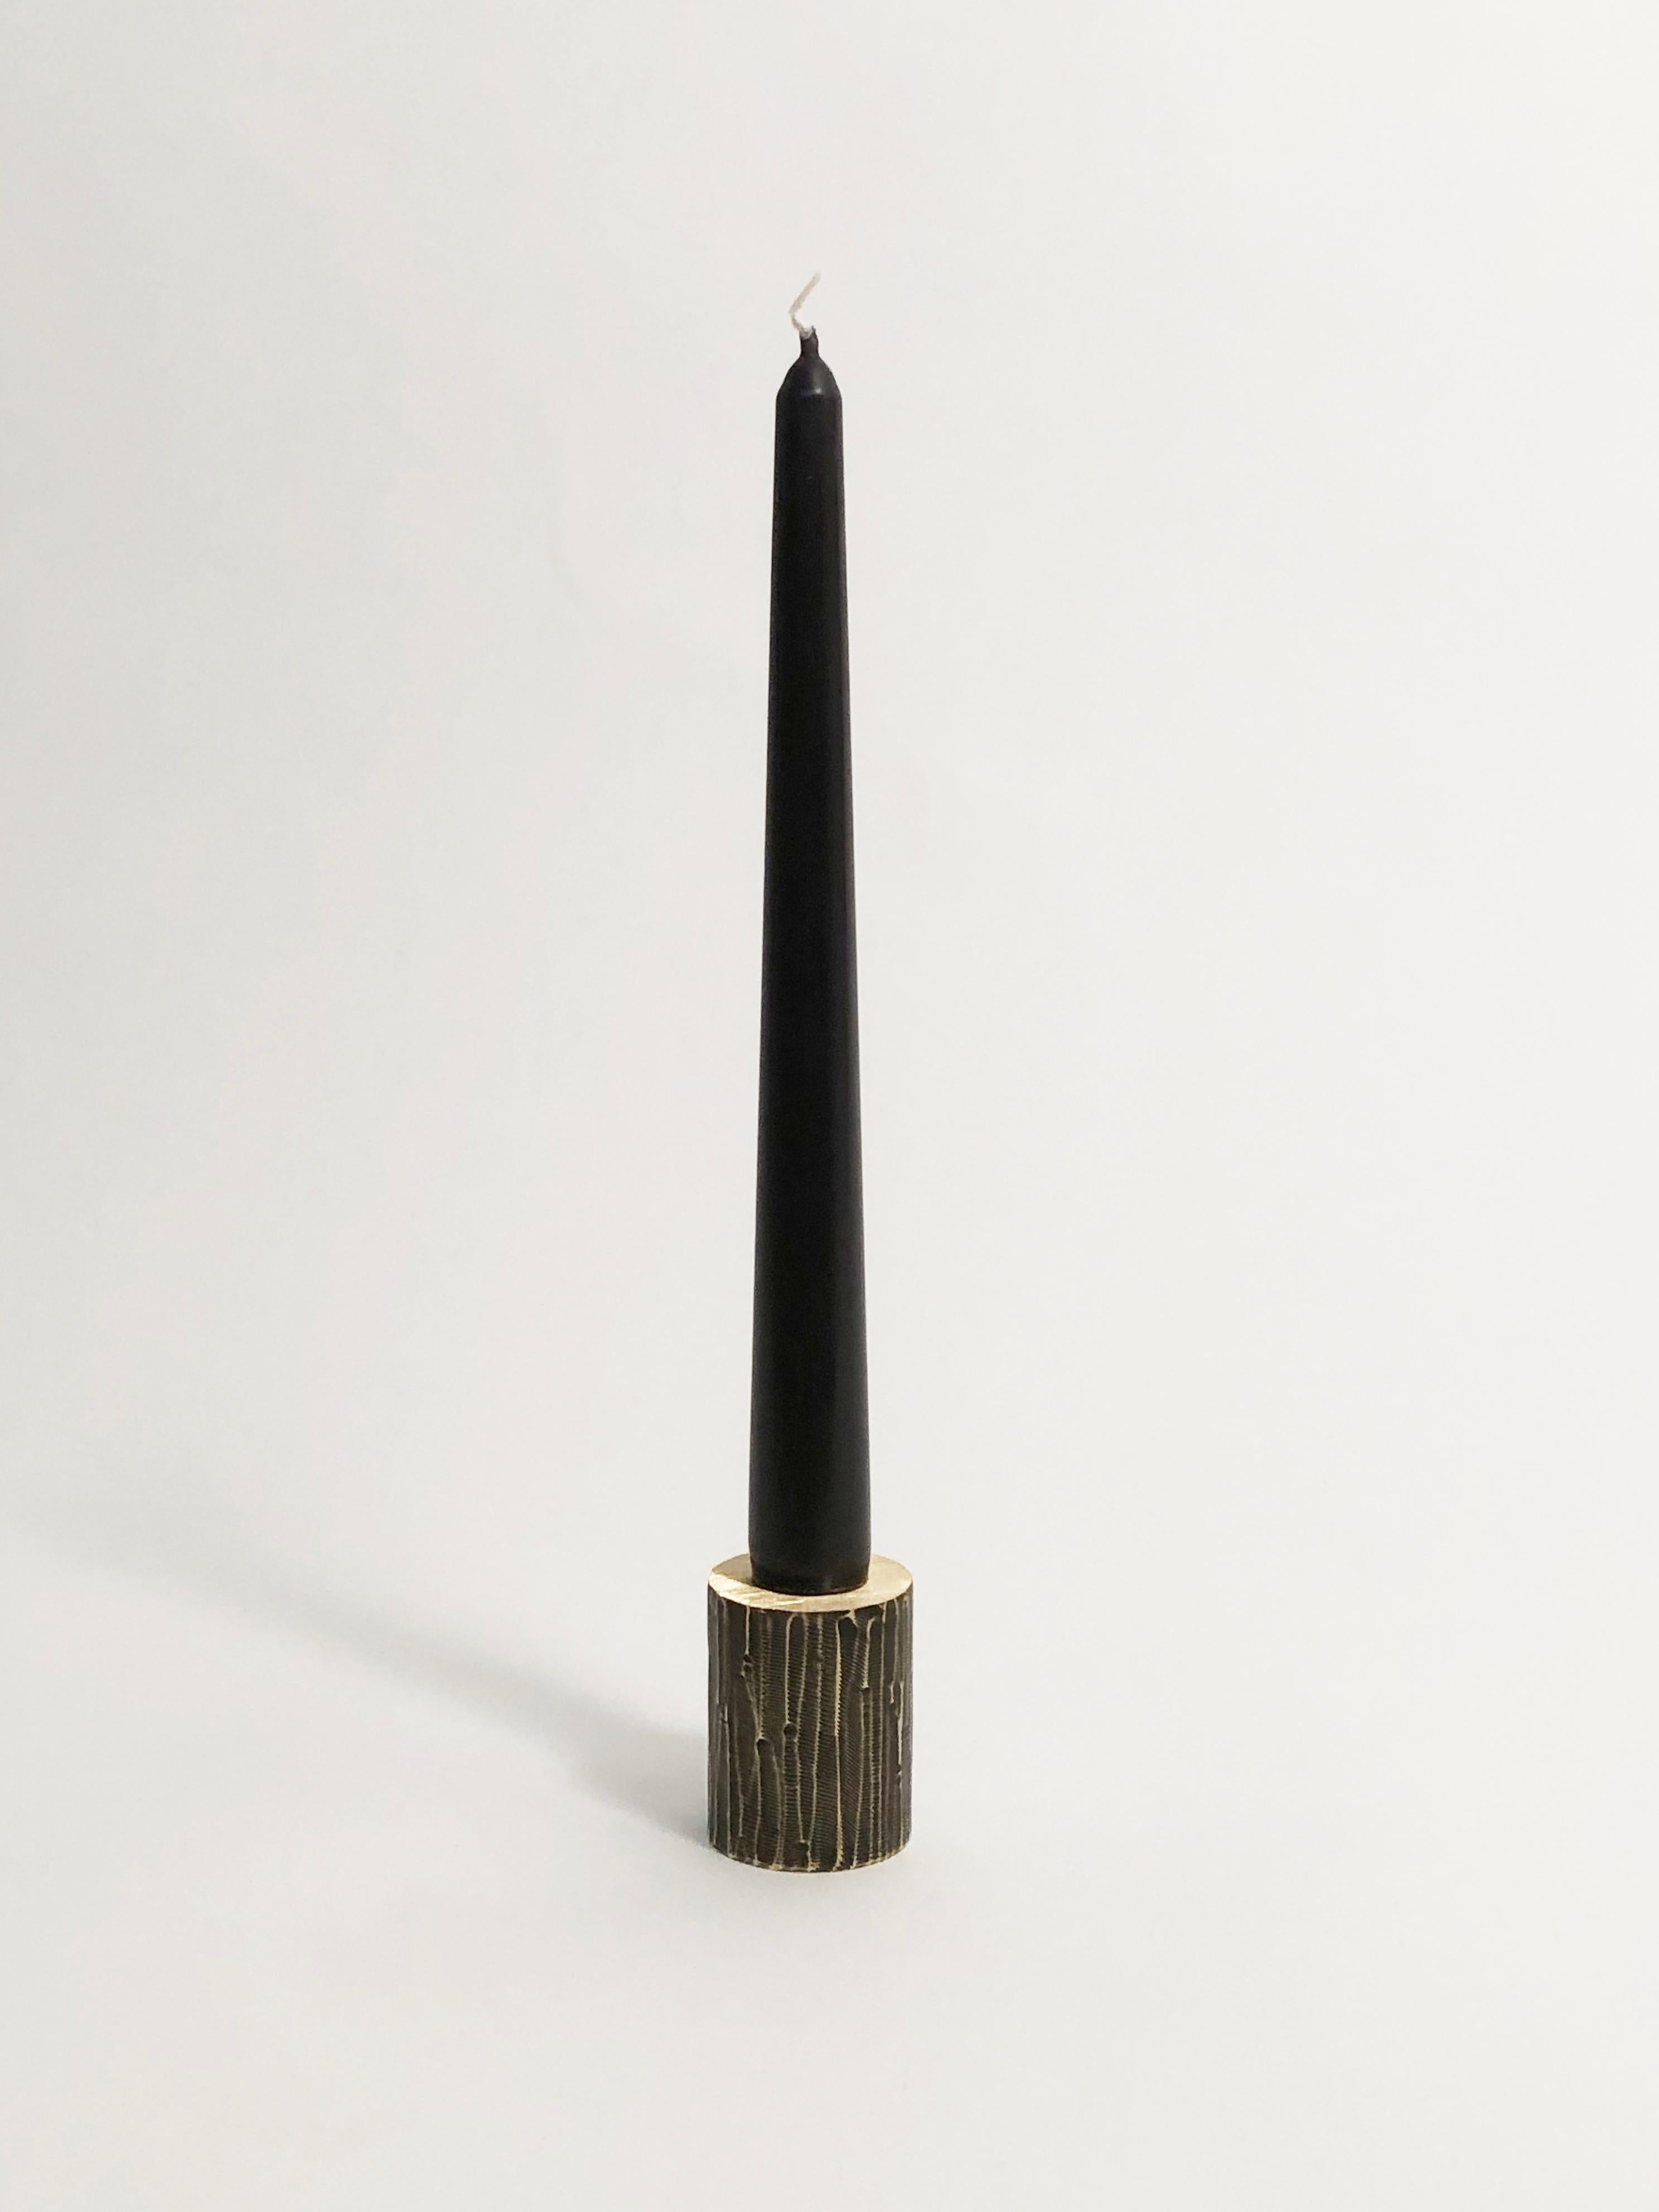 Solid brass sculpted candleholder by William Guillon by William Guillon 
Signed William Guillon
Dimensions: Diameter 4 x height 5 cm
Also available: Diameter 3.5 x height 6 cm
Materials: Solid brass, patinated black finish, with polished edge
 Raw